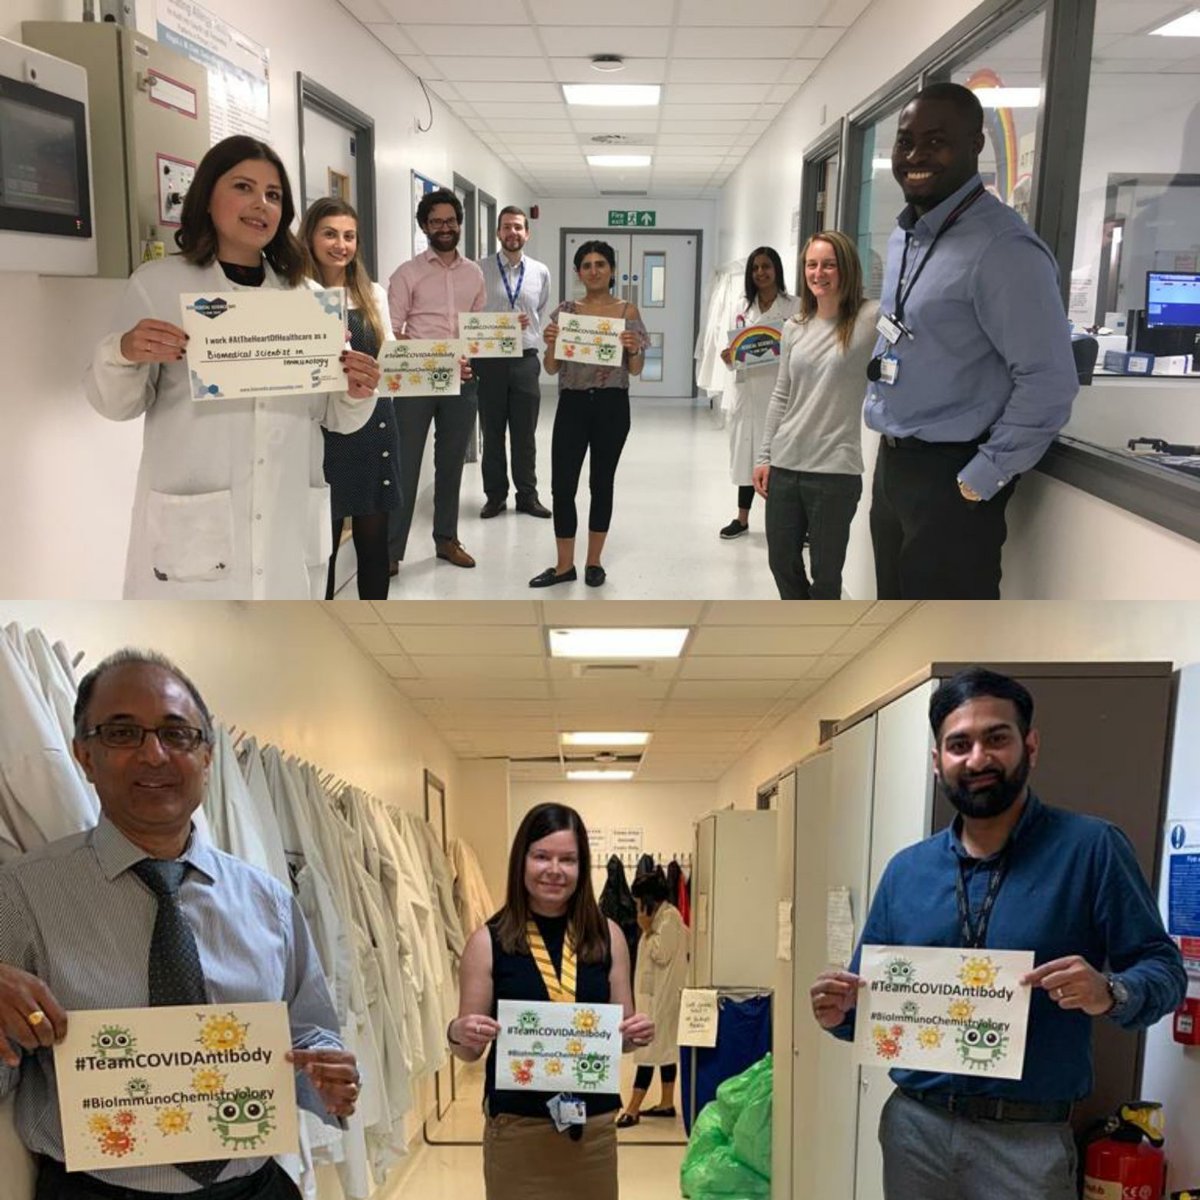 A huge shout out to our teams for successful collaborative working within our network. Well done & thank you all for your hard work guys. 🌈
#BioImmunoChemistryology #BiomedicalScienceDay2020 #AtTheHeartOfHealthcare #BiomedicalScientists